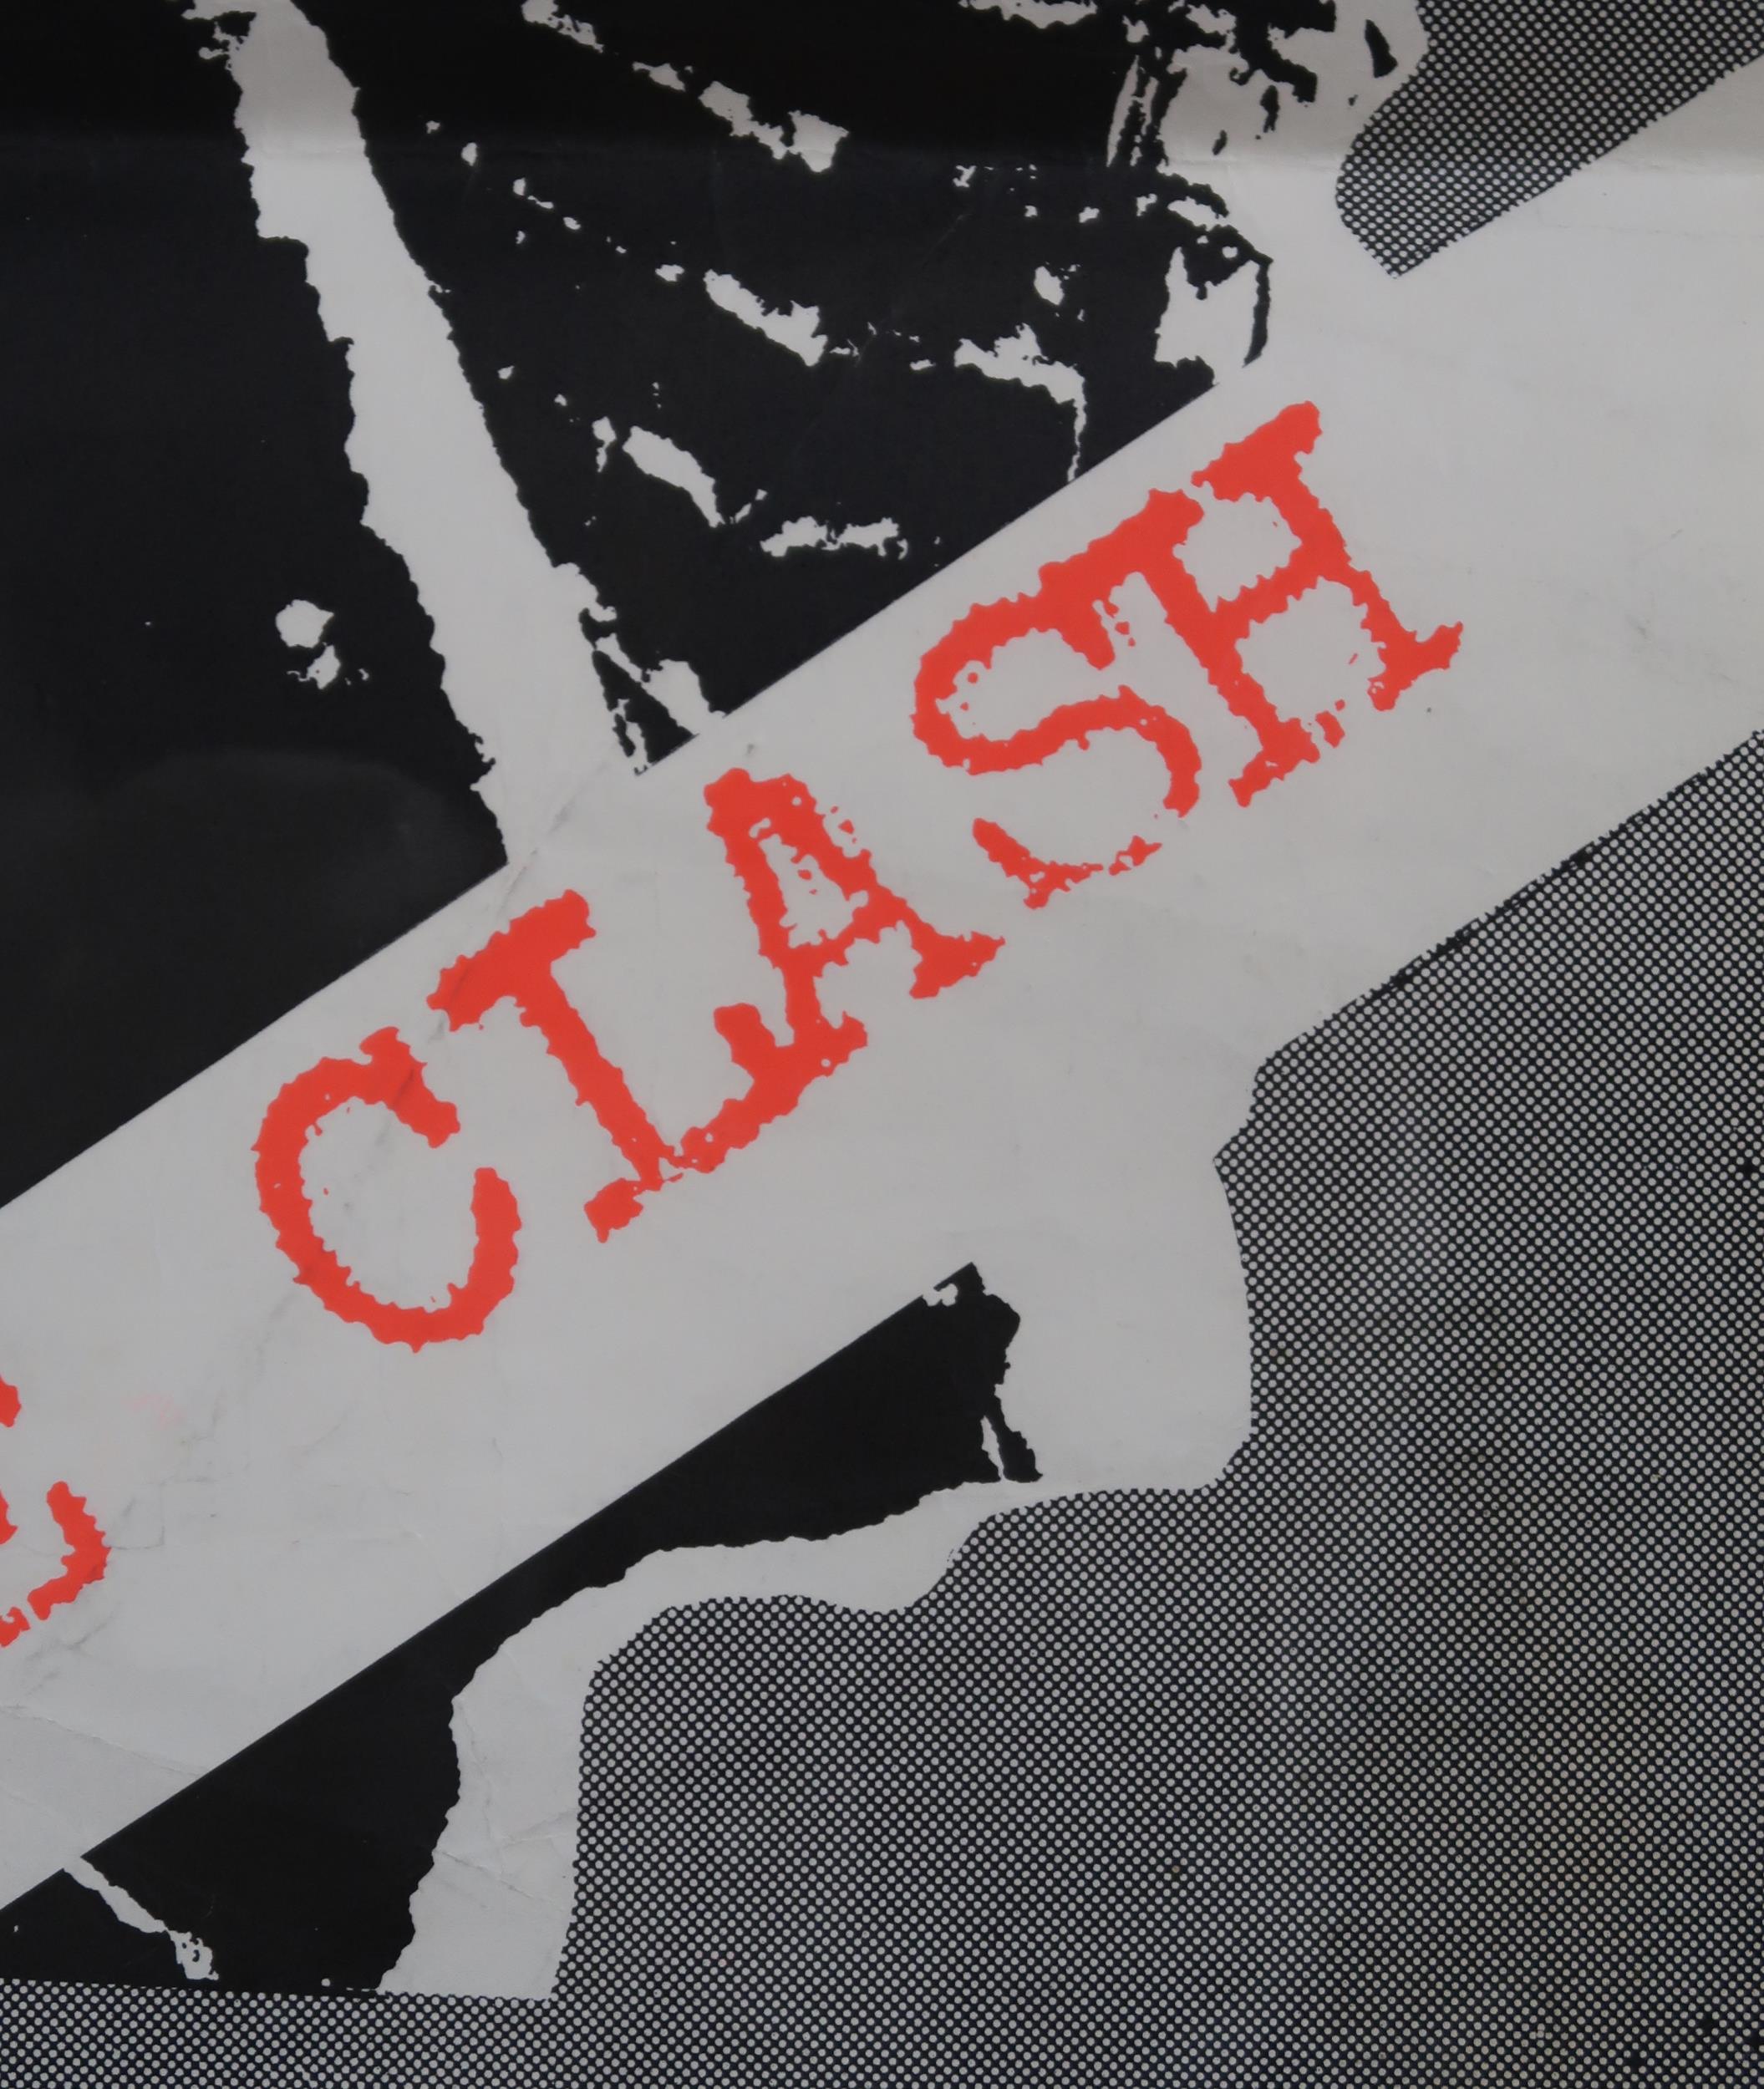 The Clash a Clash poster from their debut album with Paul Simonon, Joe Strummer and Mick Jones - Image 2 of 12